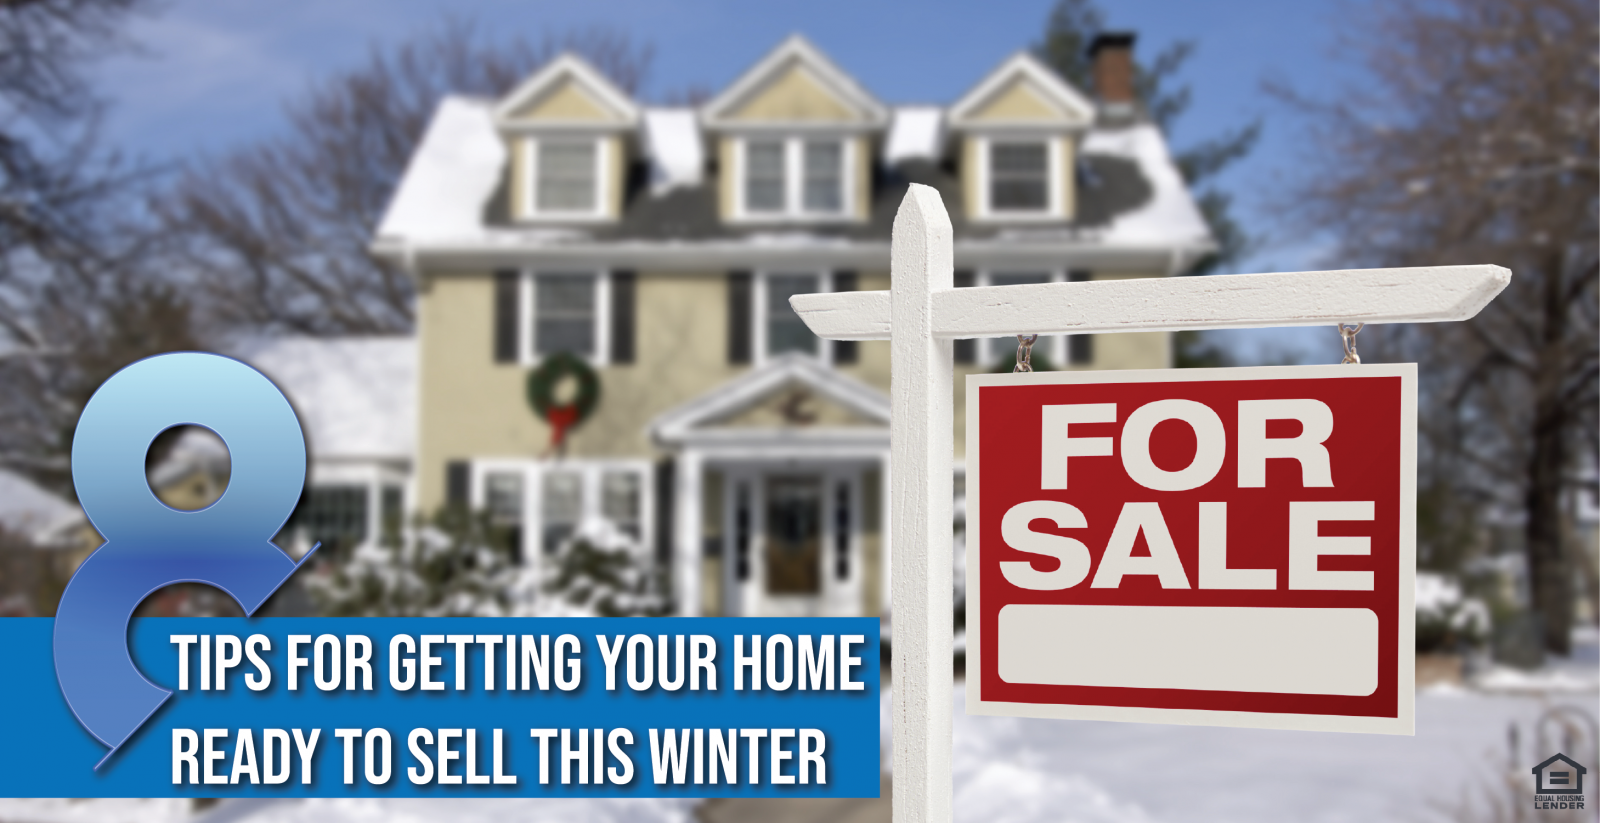 8 Tips for Getting Your Home Ready to Sell This Winter